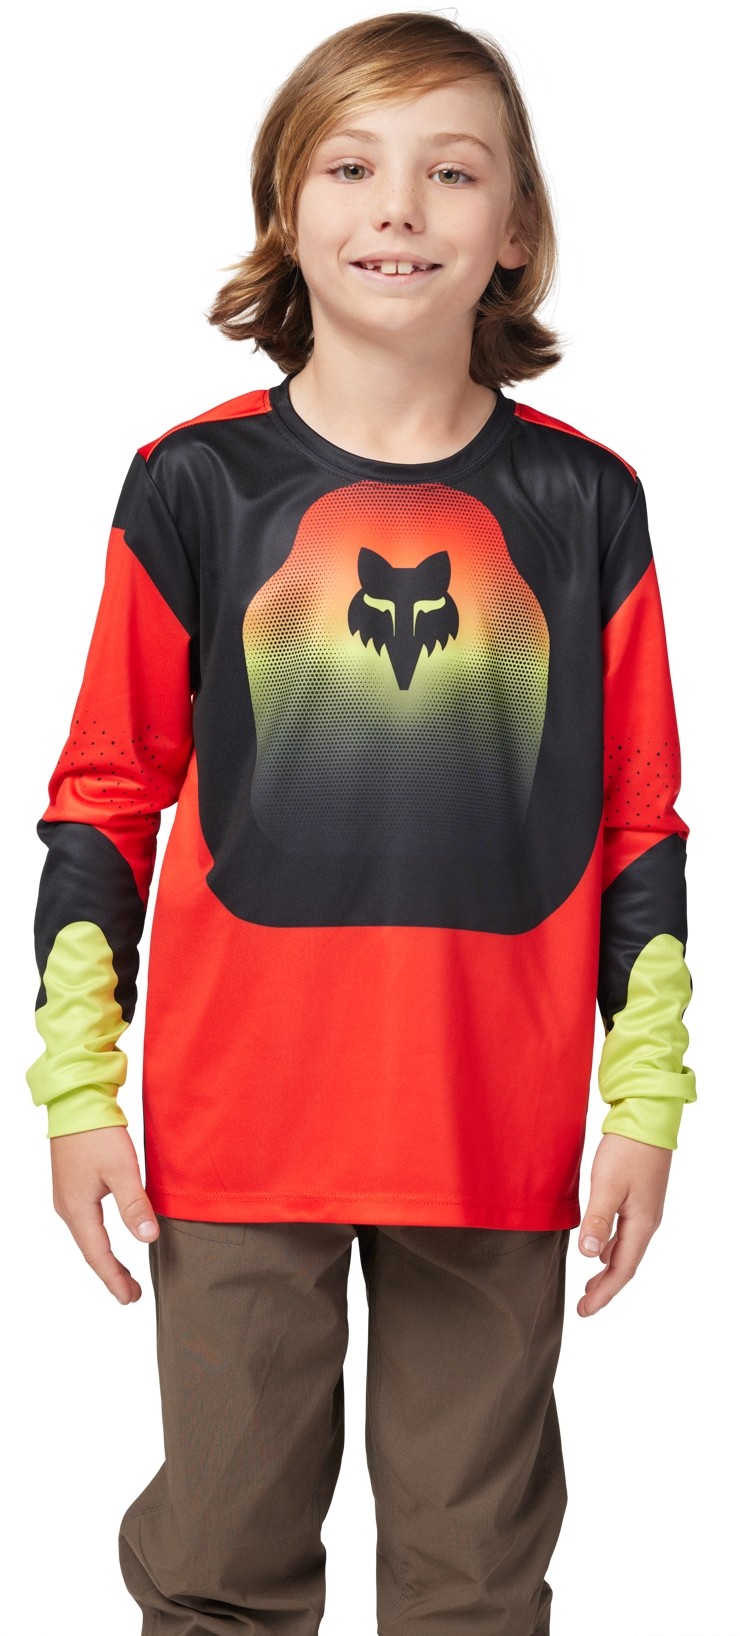 Ranger Youth Long Sleeve MTB Jersey Revise image 2